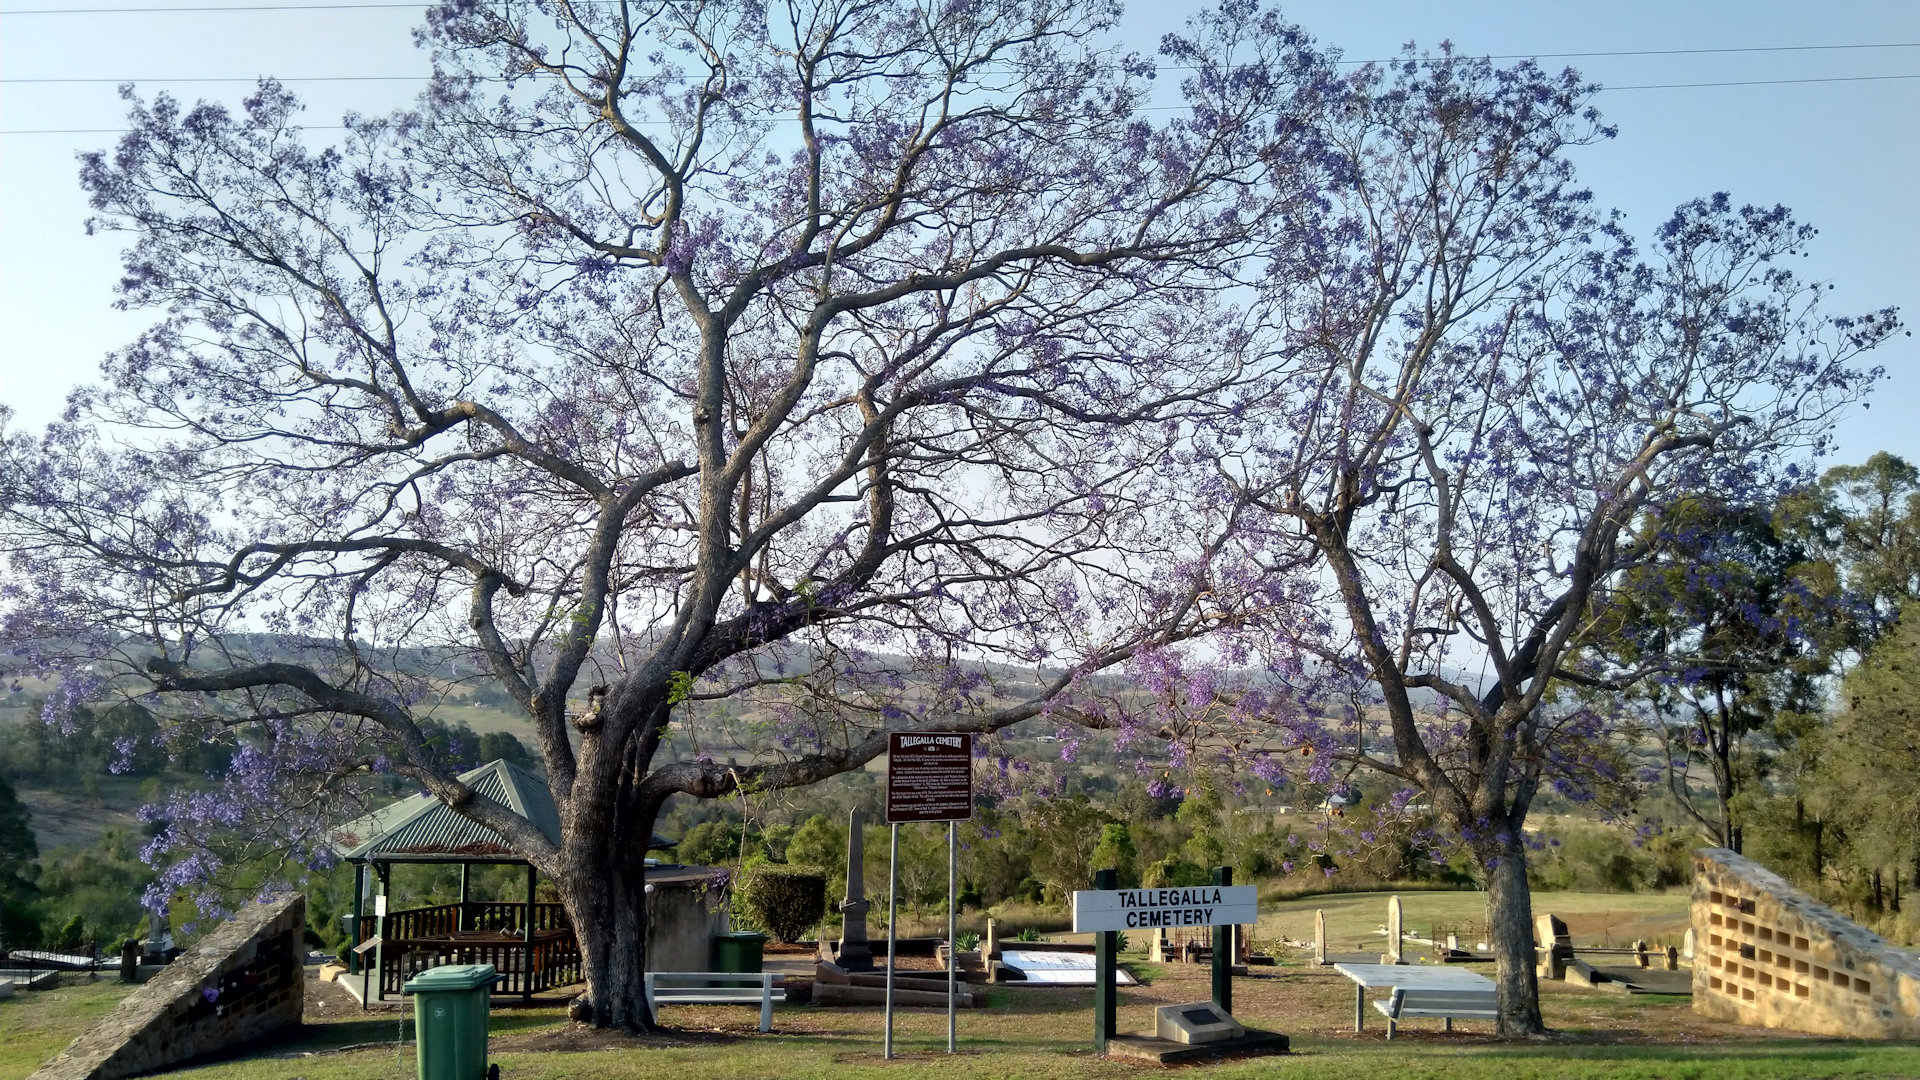 Large Jacaranda trees at the front of a cemetery, Tallegalla Cemetery